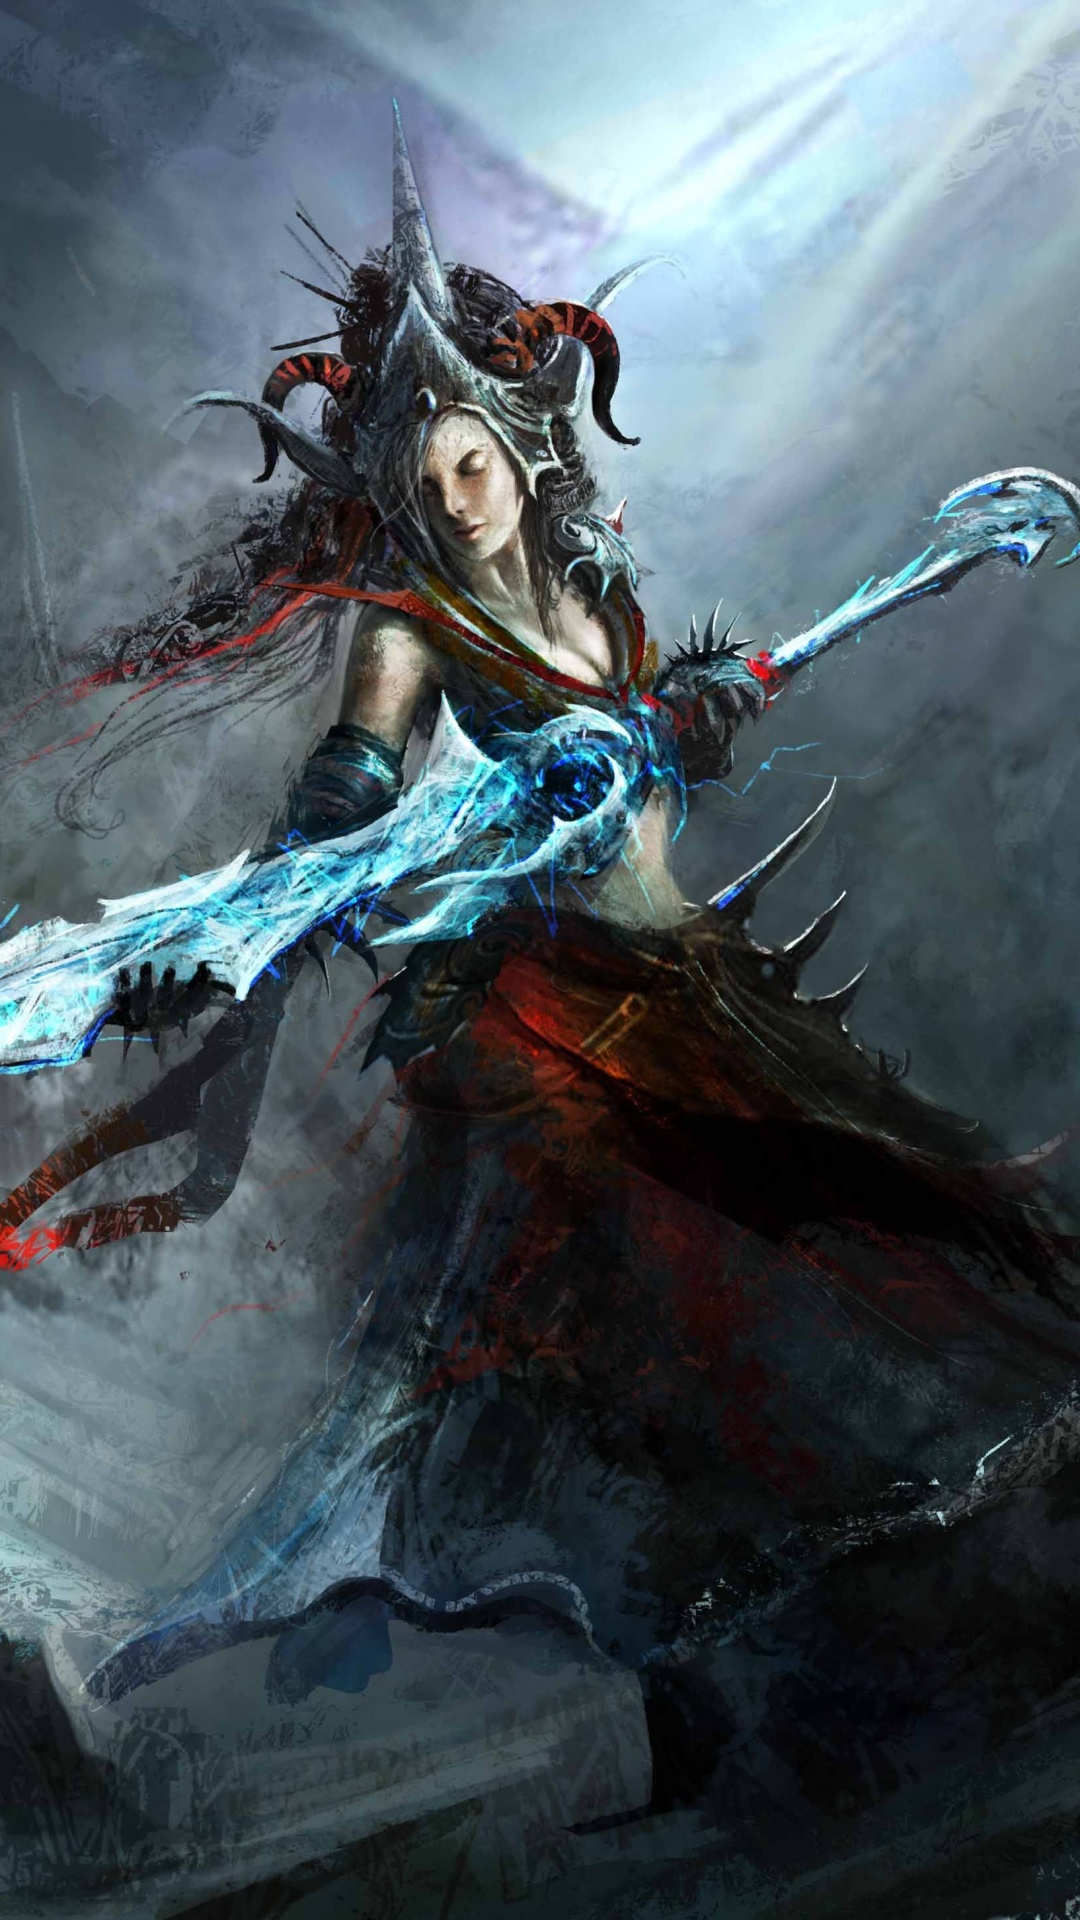 Woman in Blue Dress Holding a Sword Illustration. Wallpaper in 1080x1920 Resolution